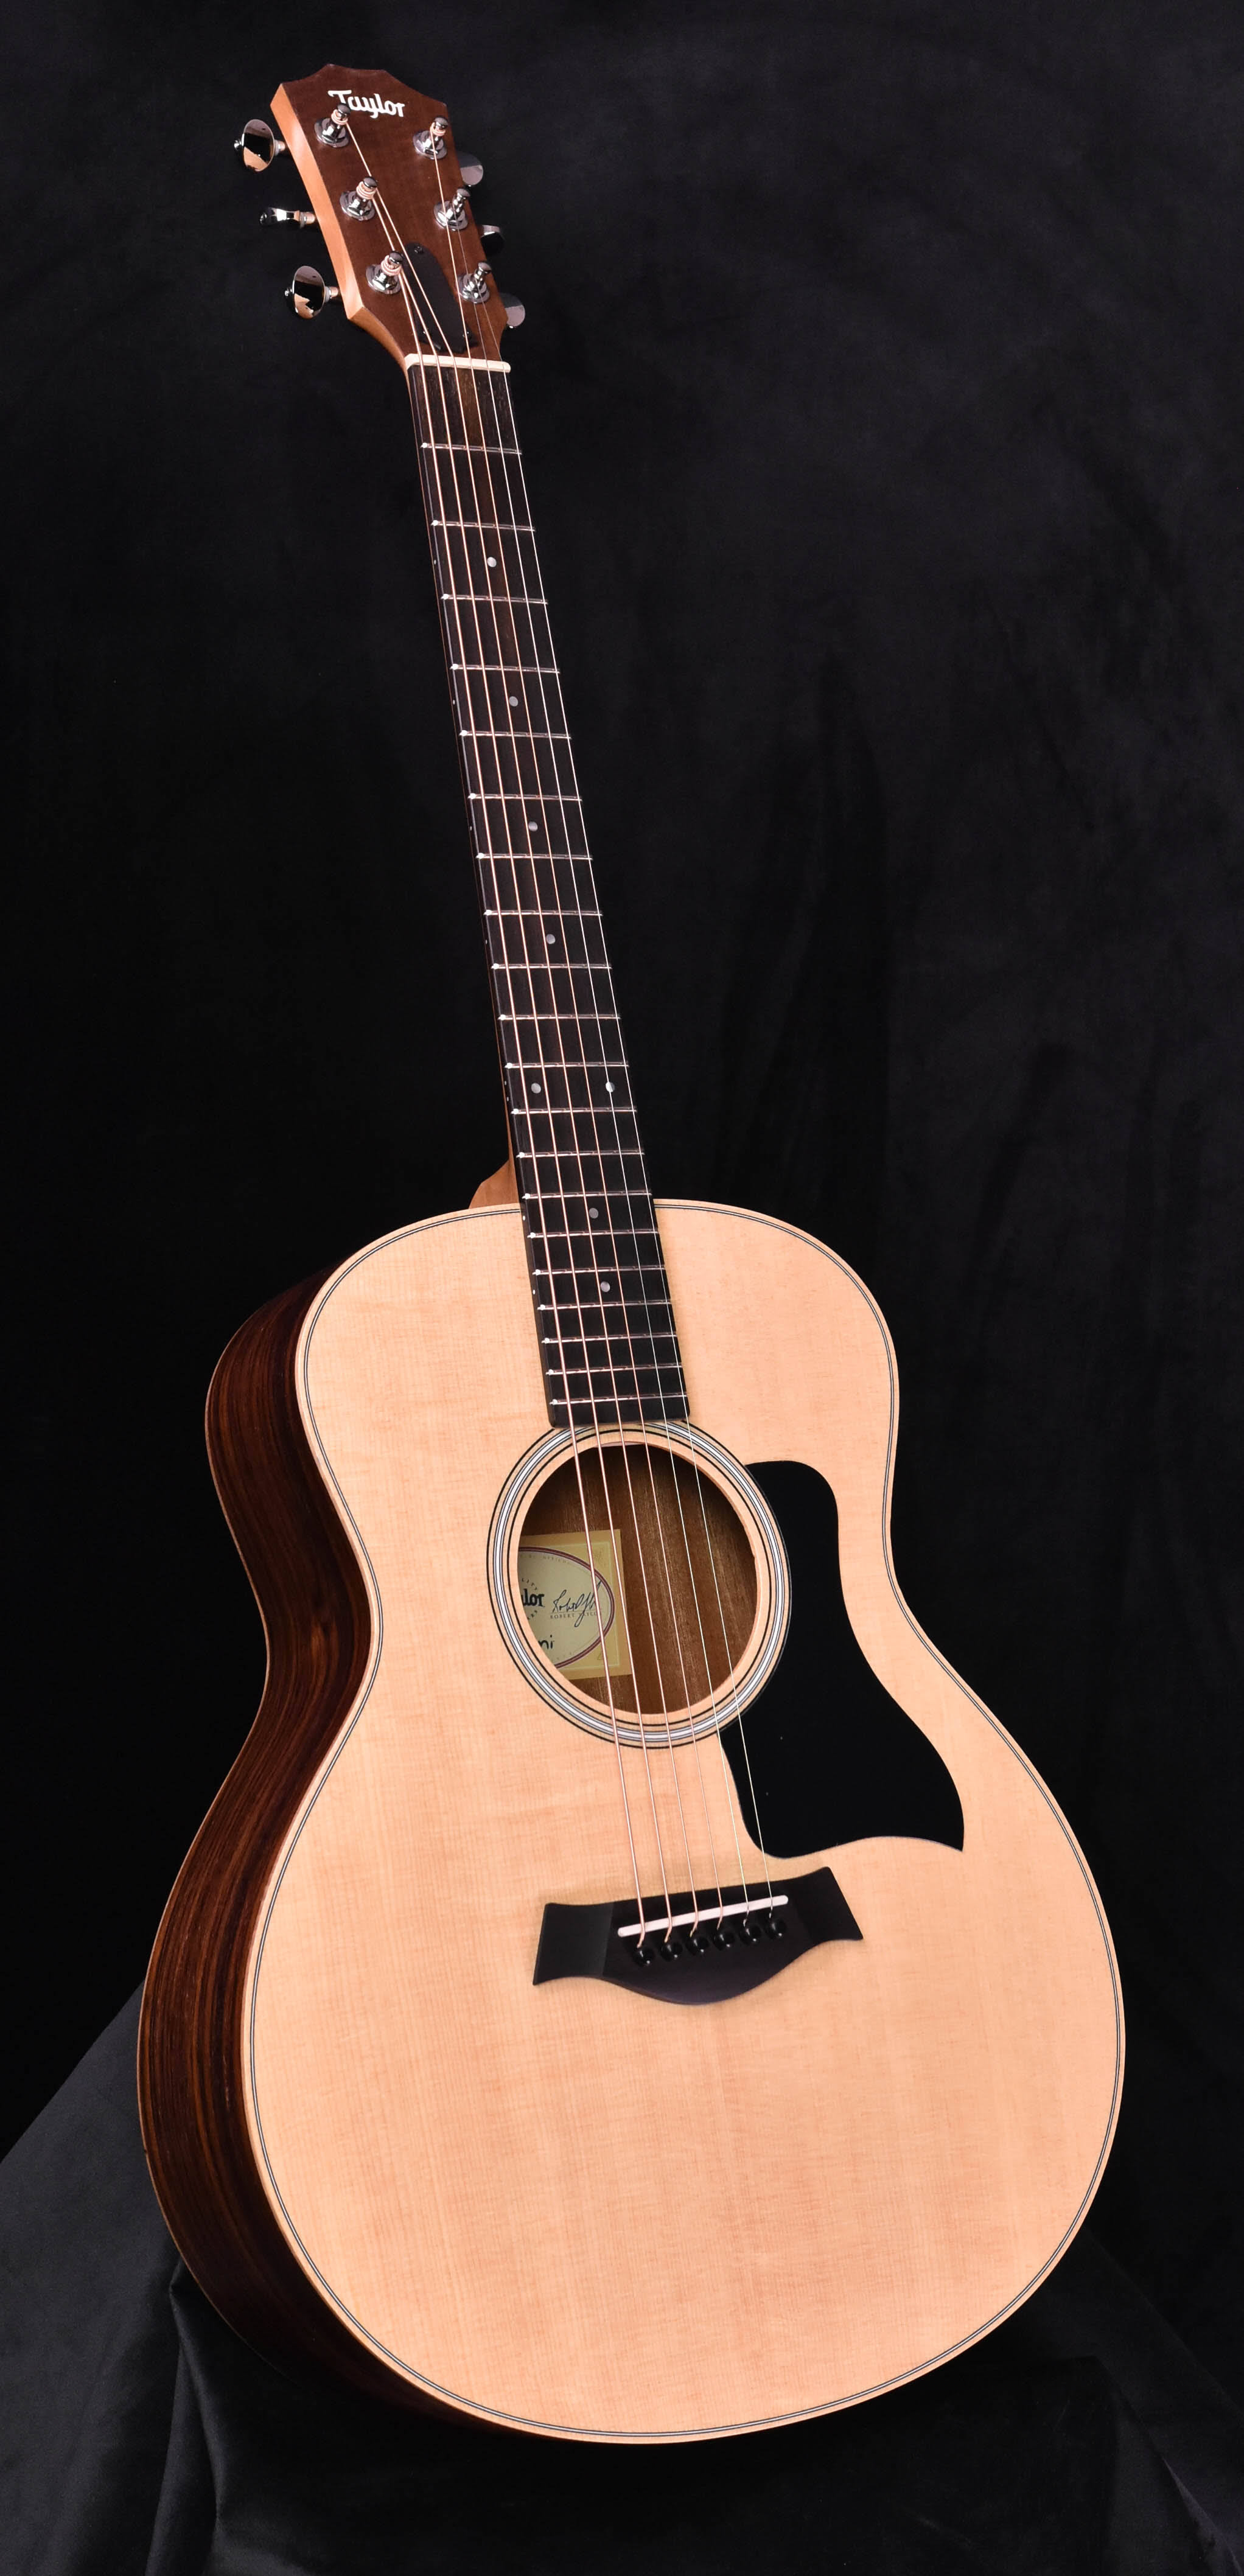 Taylor GS Mini Rosewood Acoustic